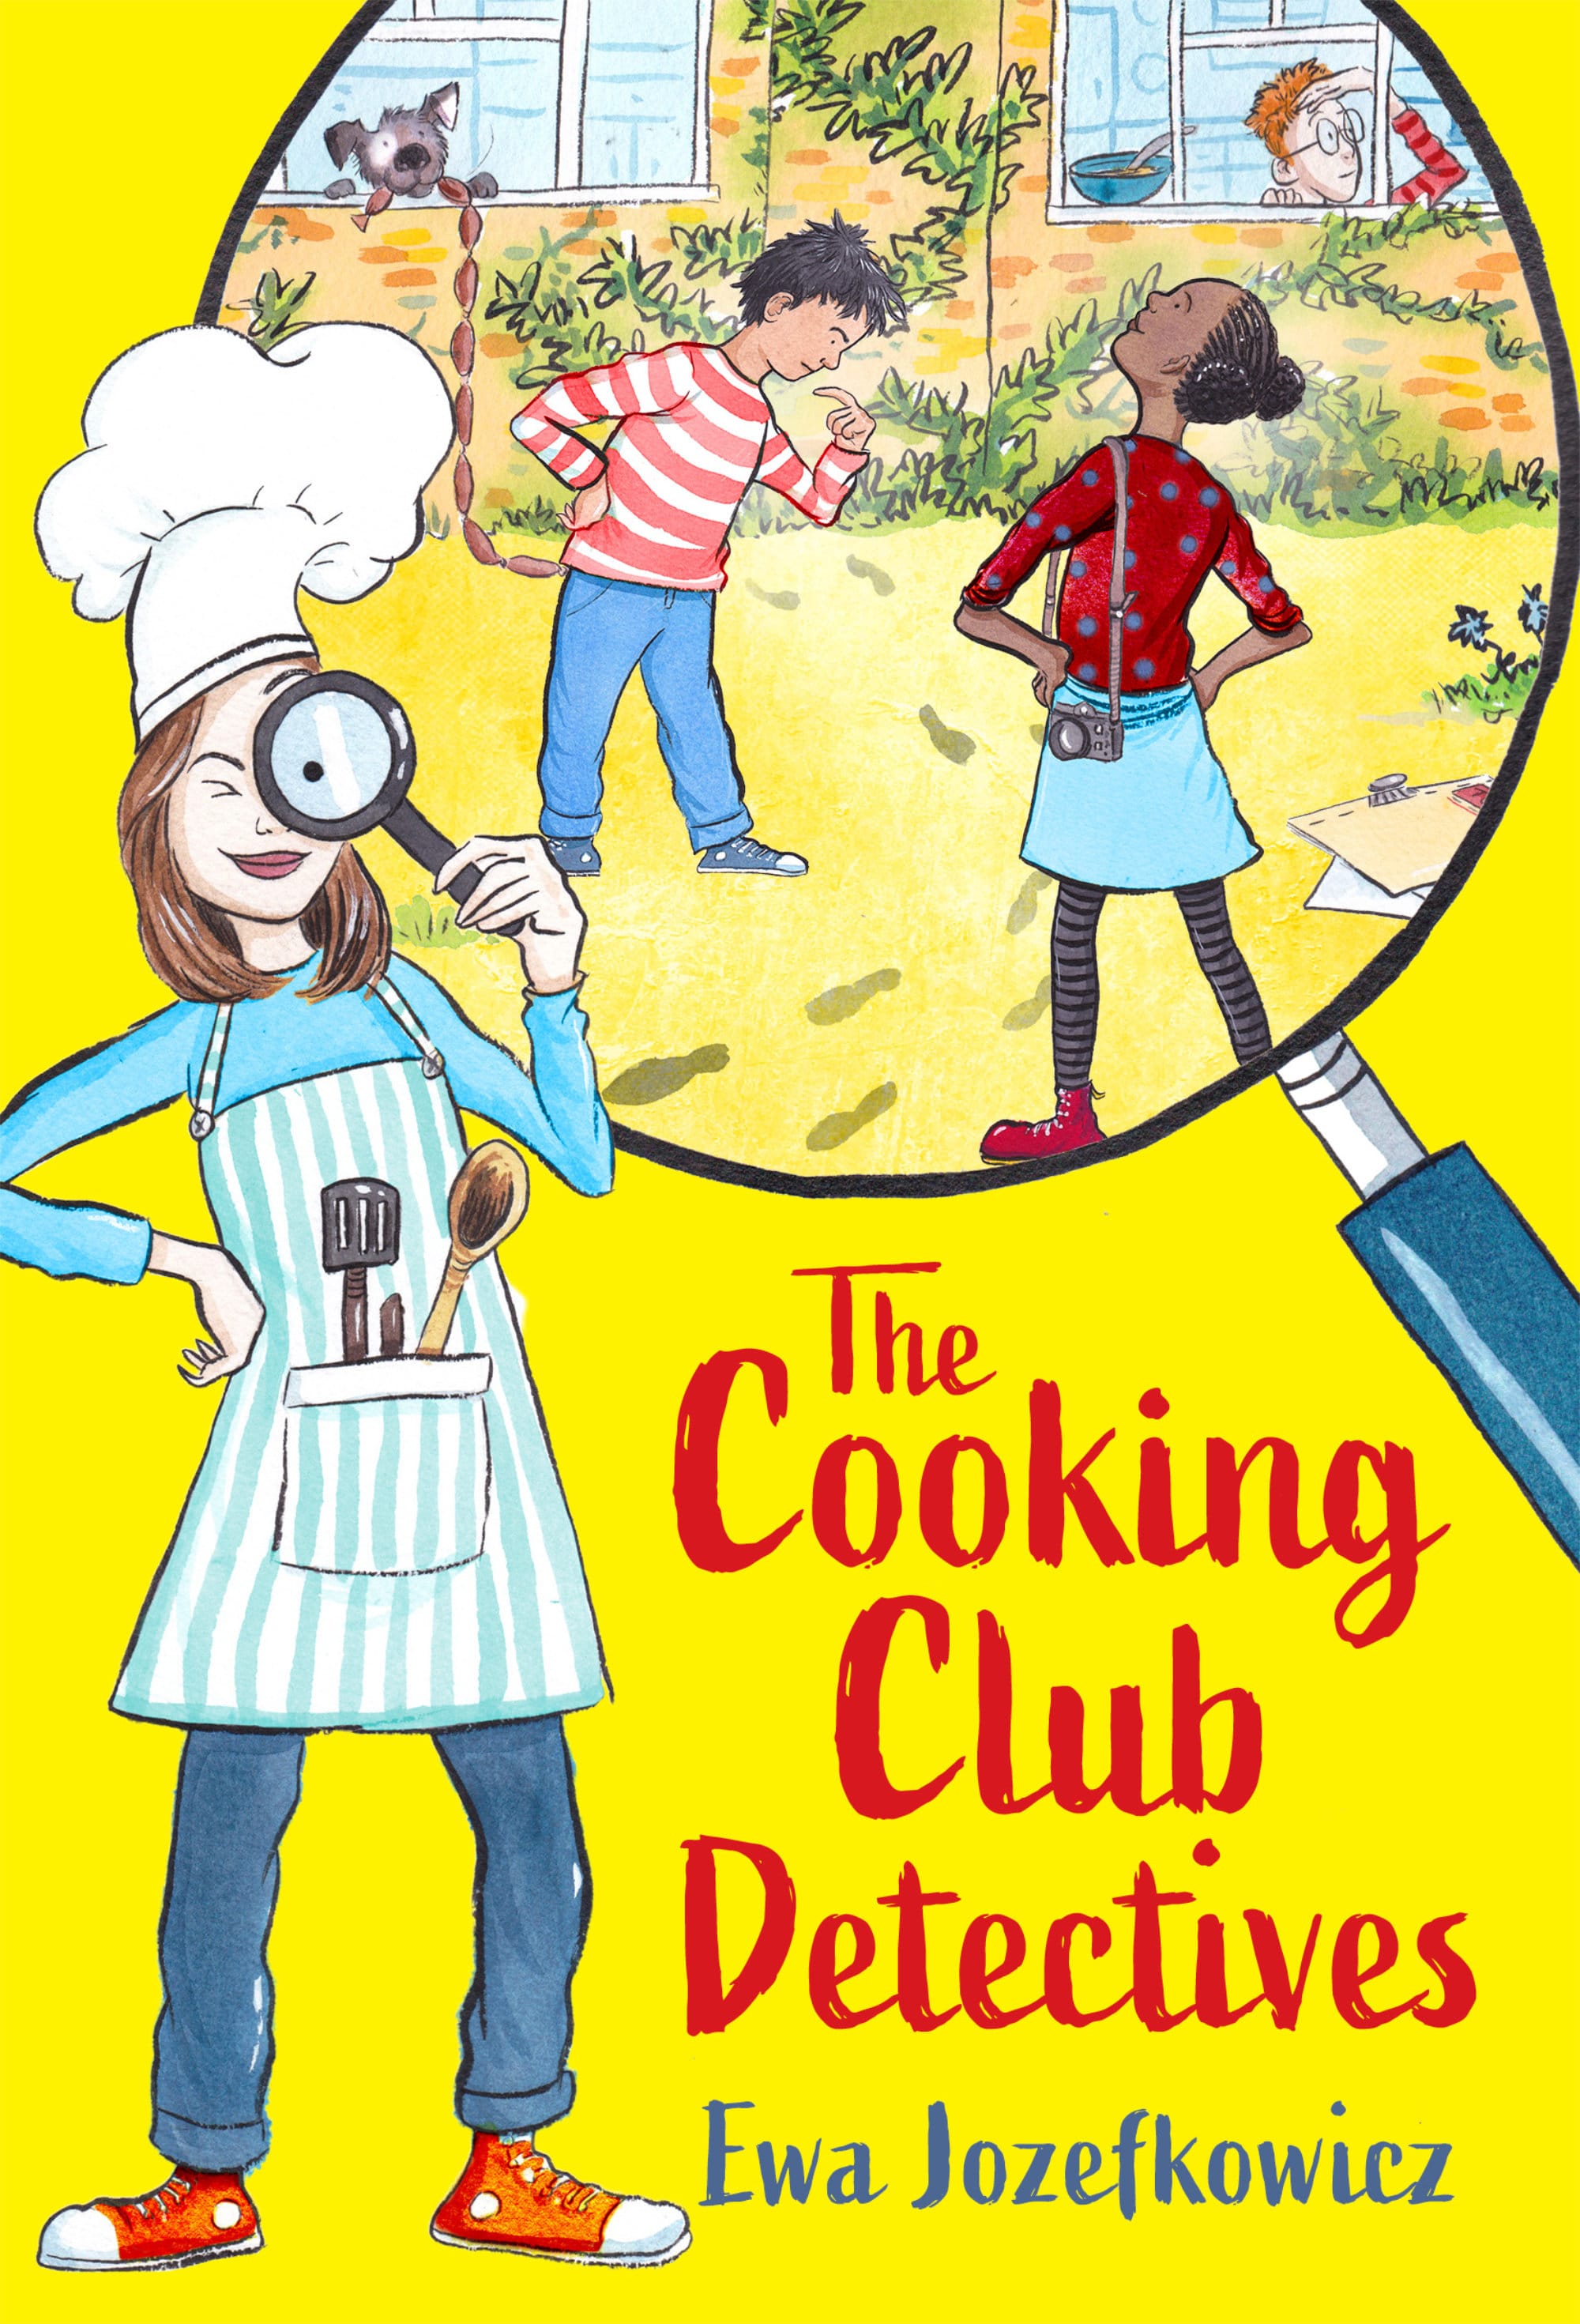 The Cooking Club Detectives book cover